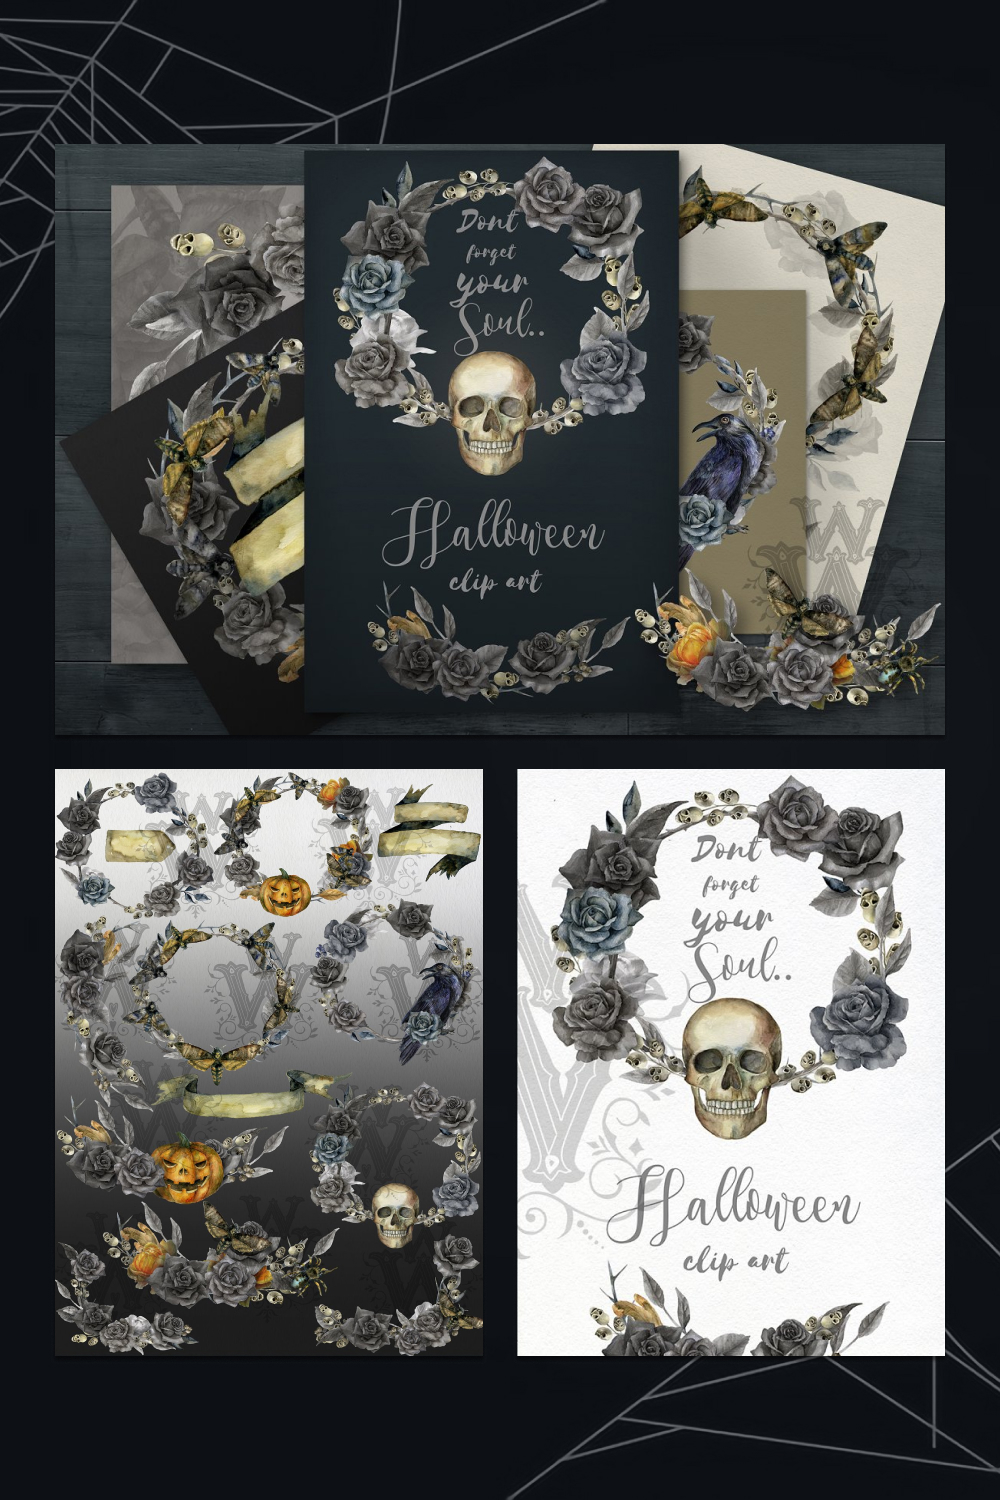 Halloween prints are featured.